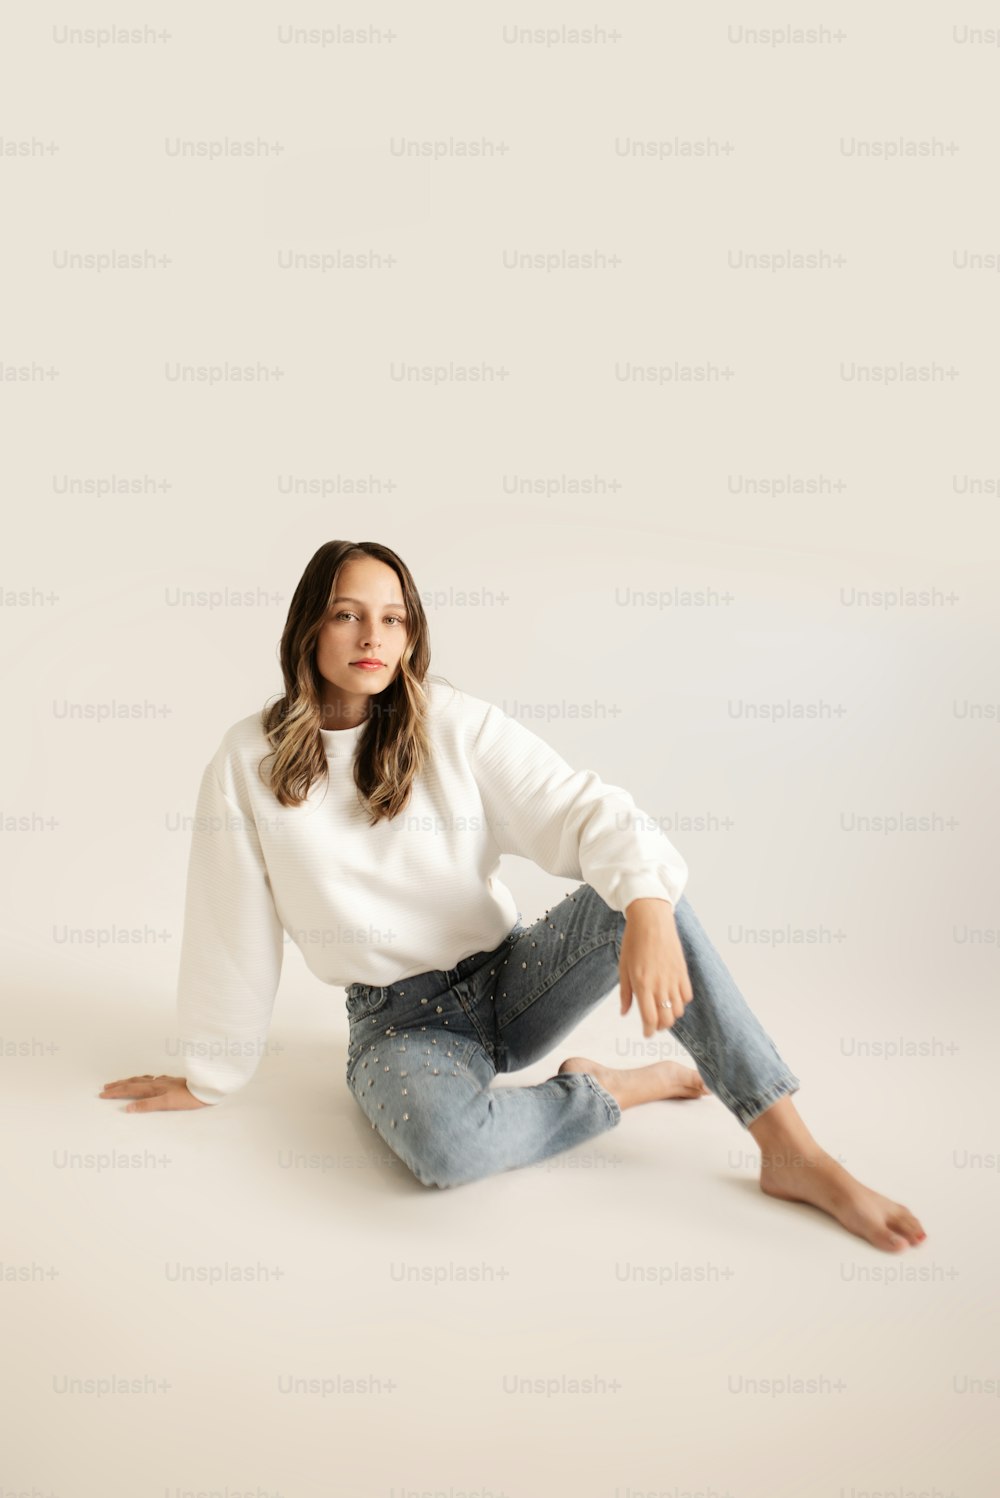 a woman sitting on the ground wearing jeans and a sweater